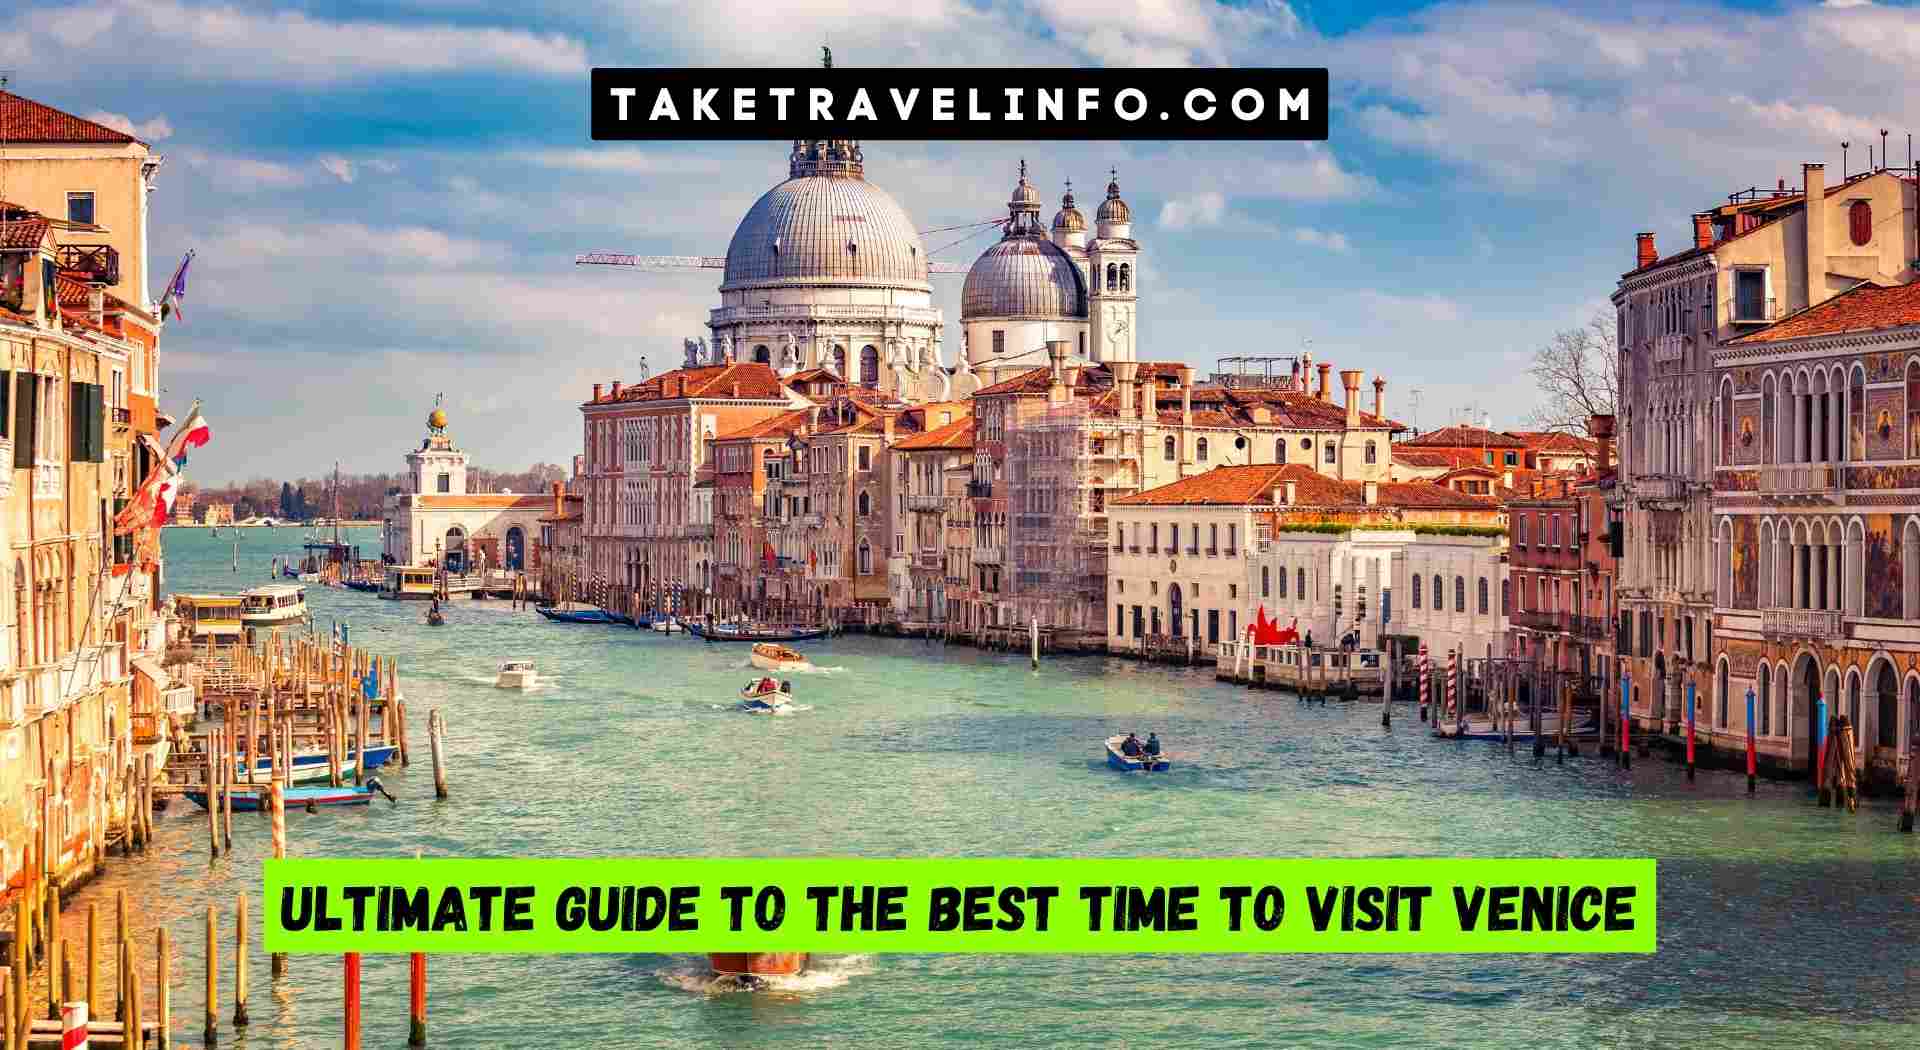 Ultimate Guide to the Best Time to Visit Venice